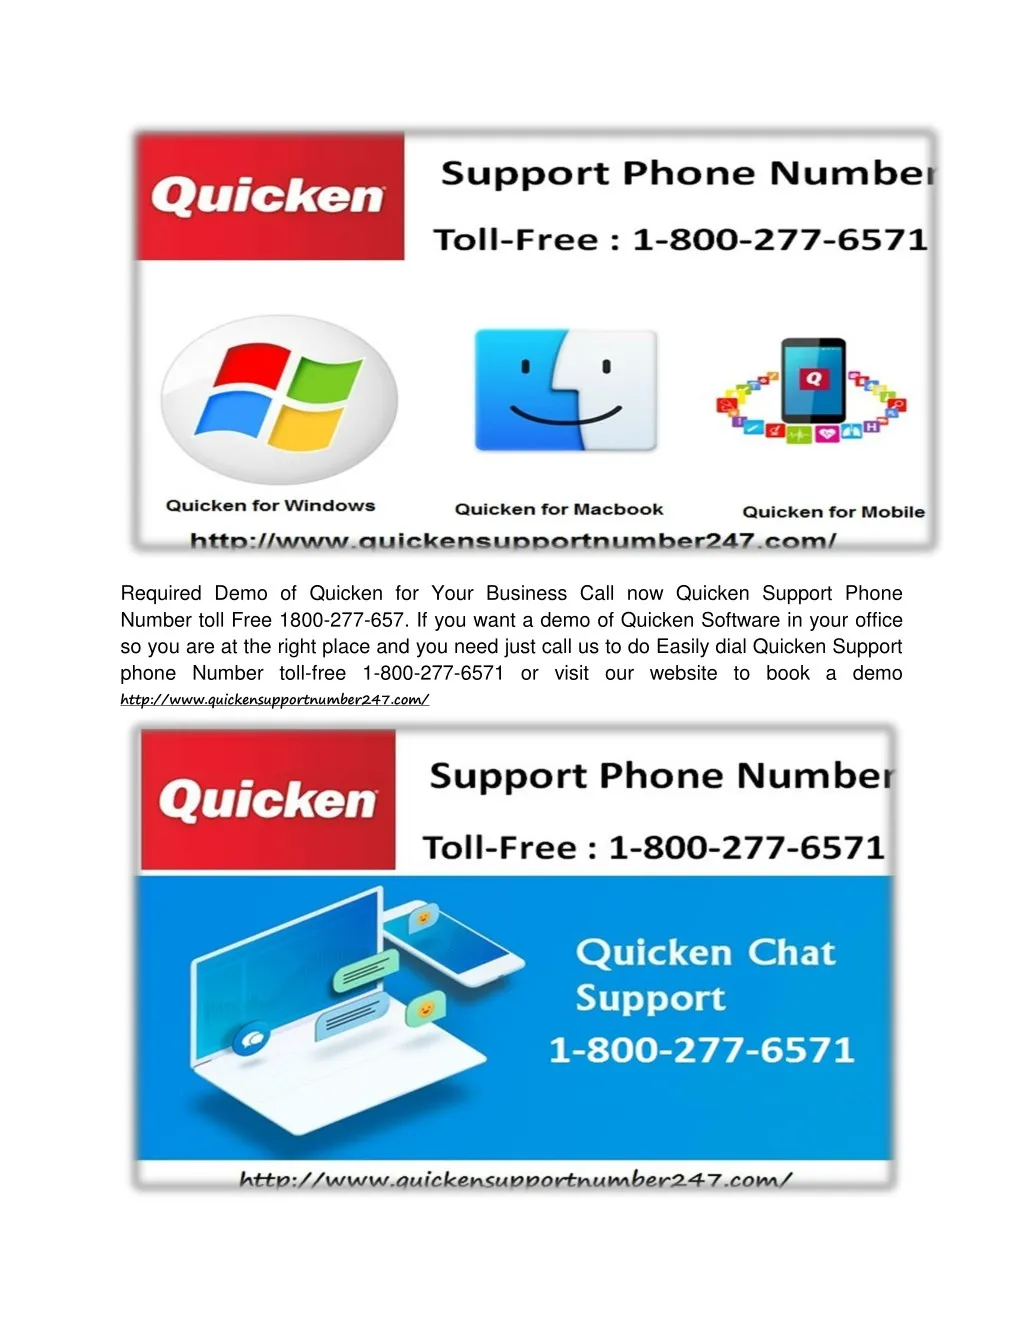 required demo of quicken for your business call